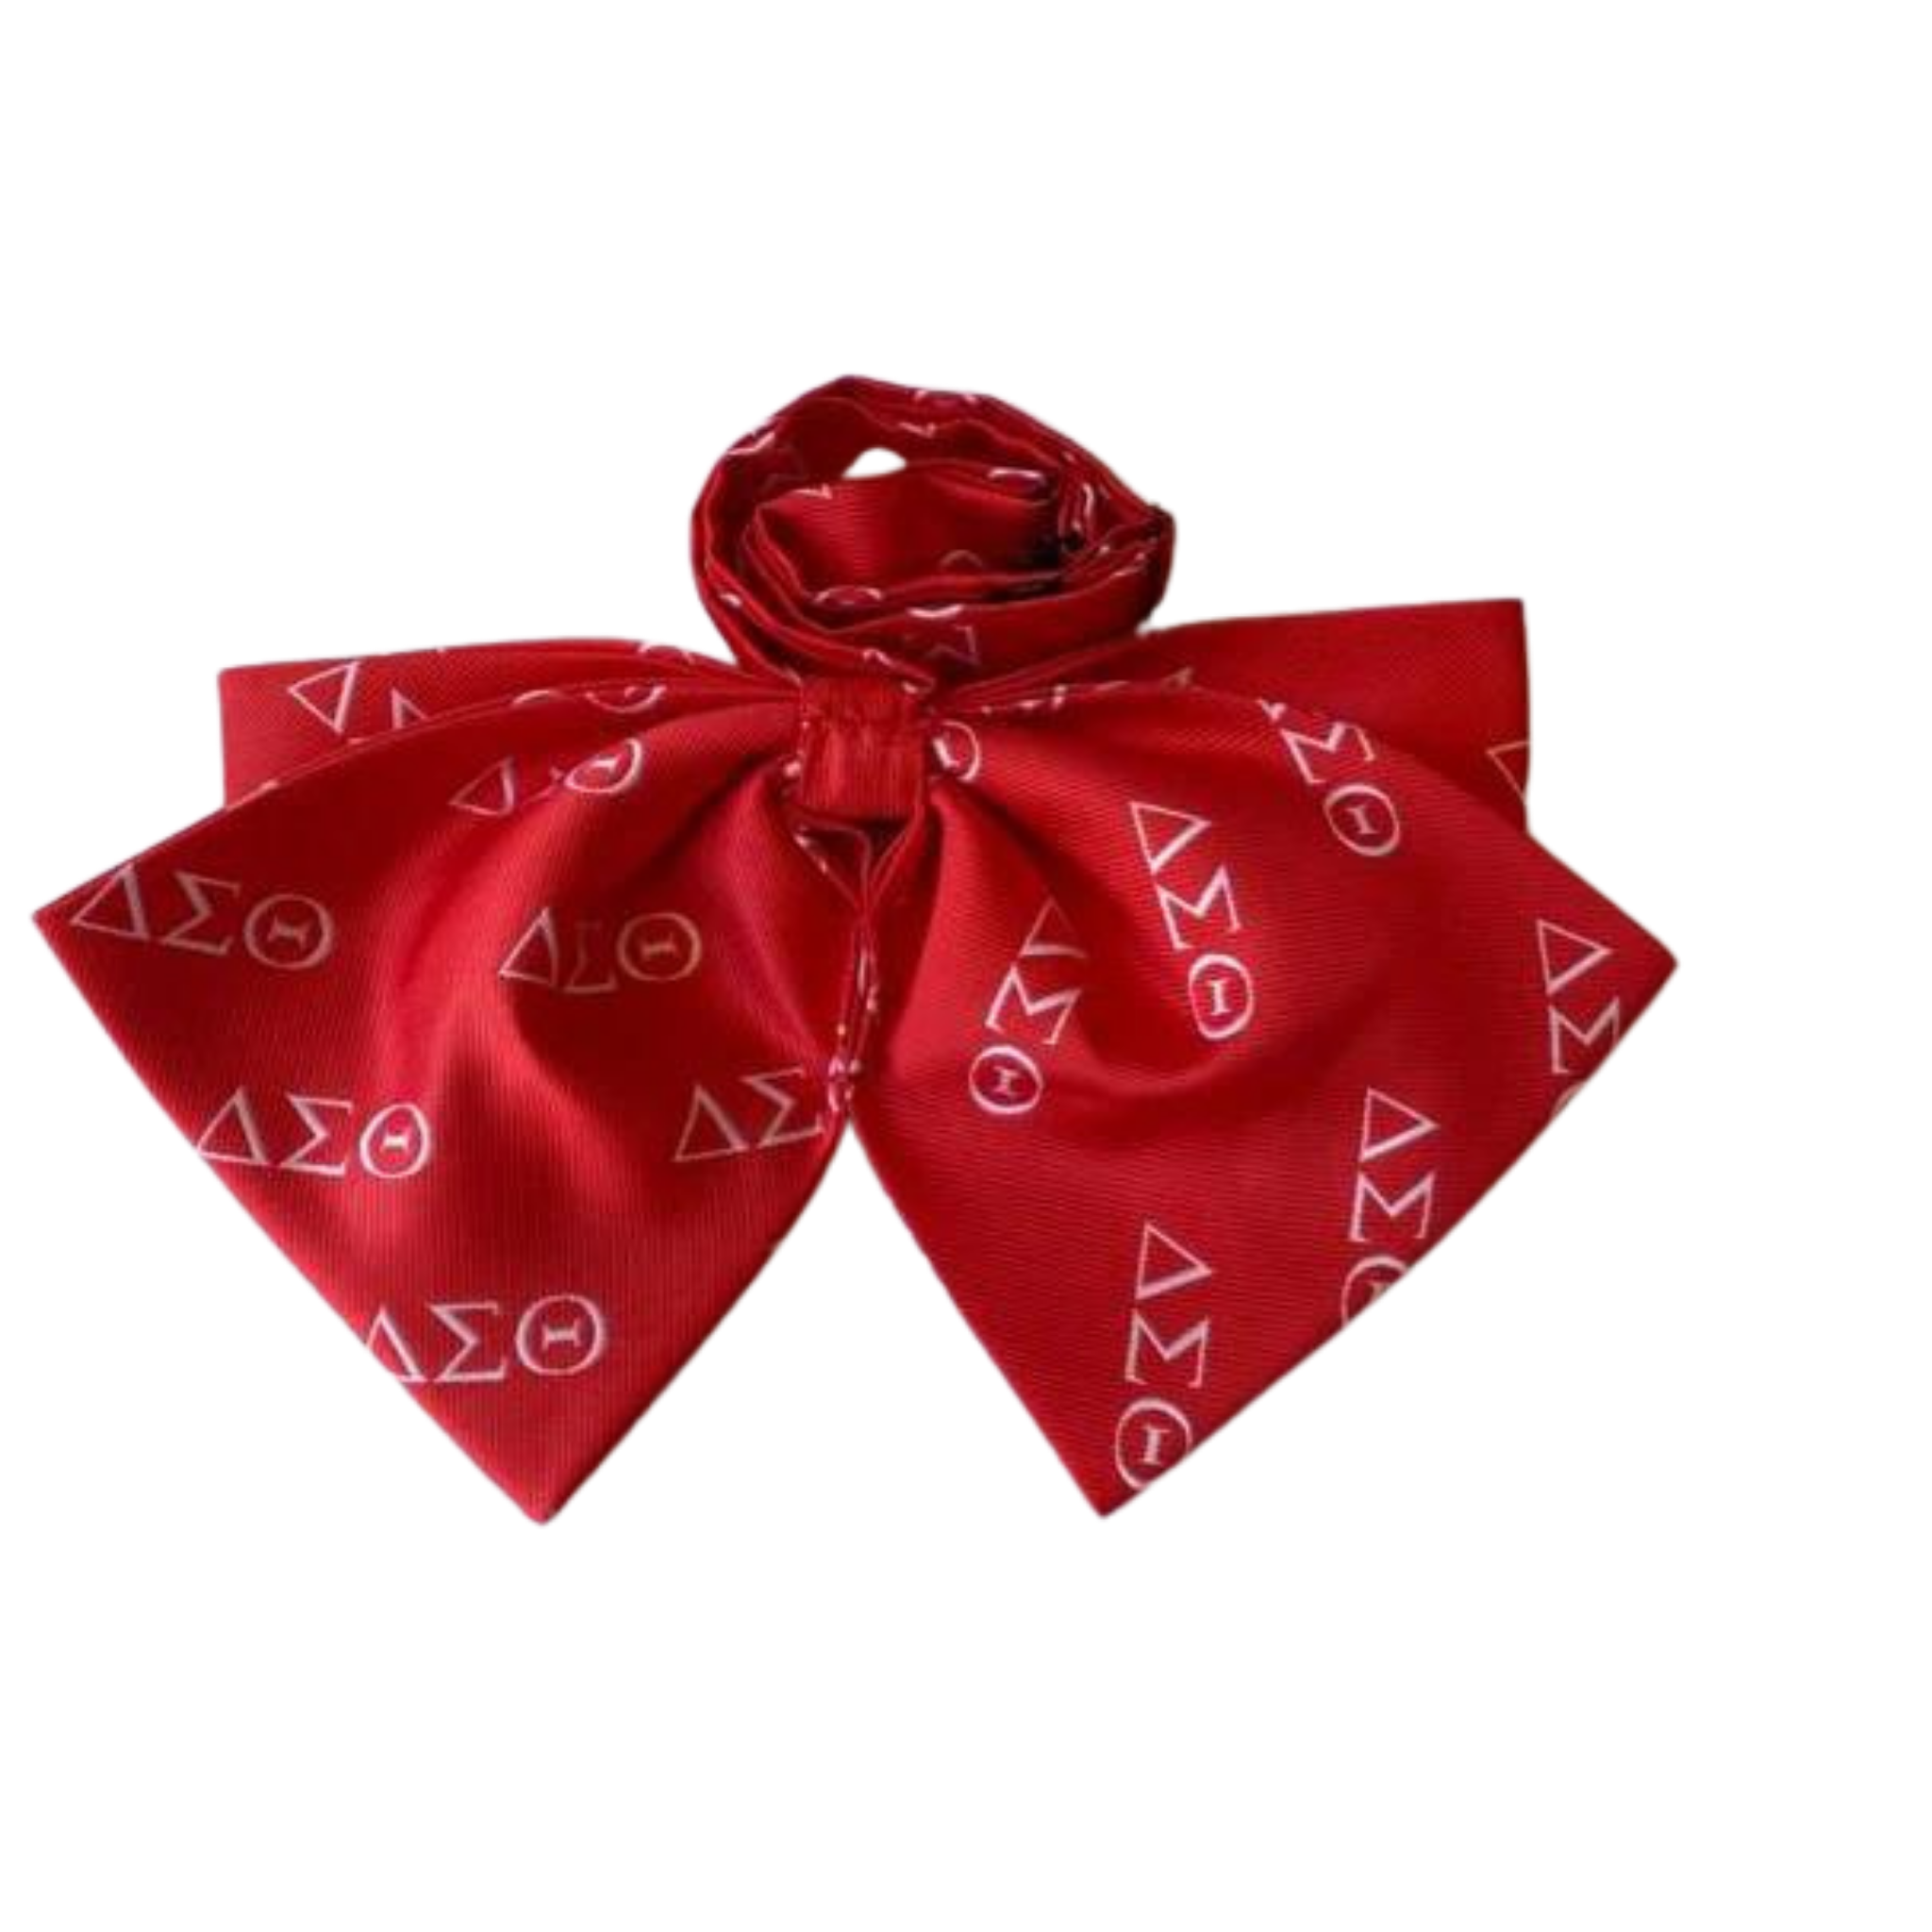 Red & White Bow Tie with DST Symbols